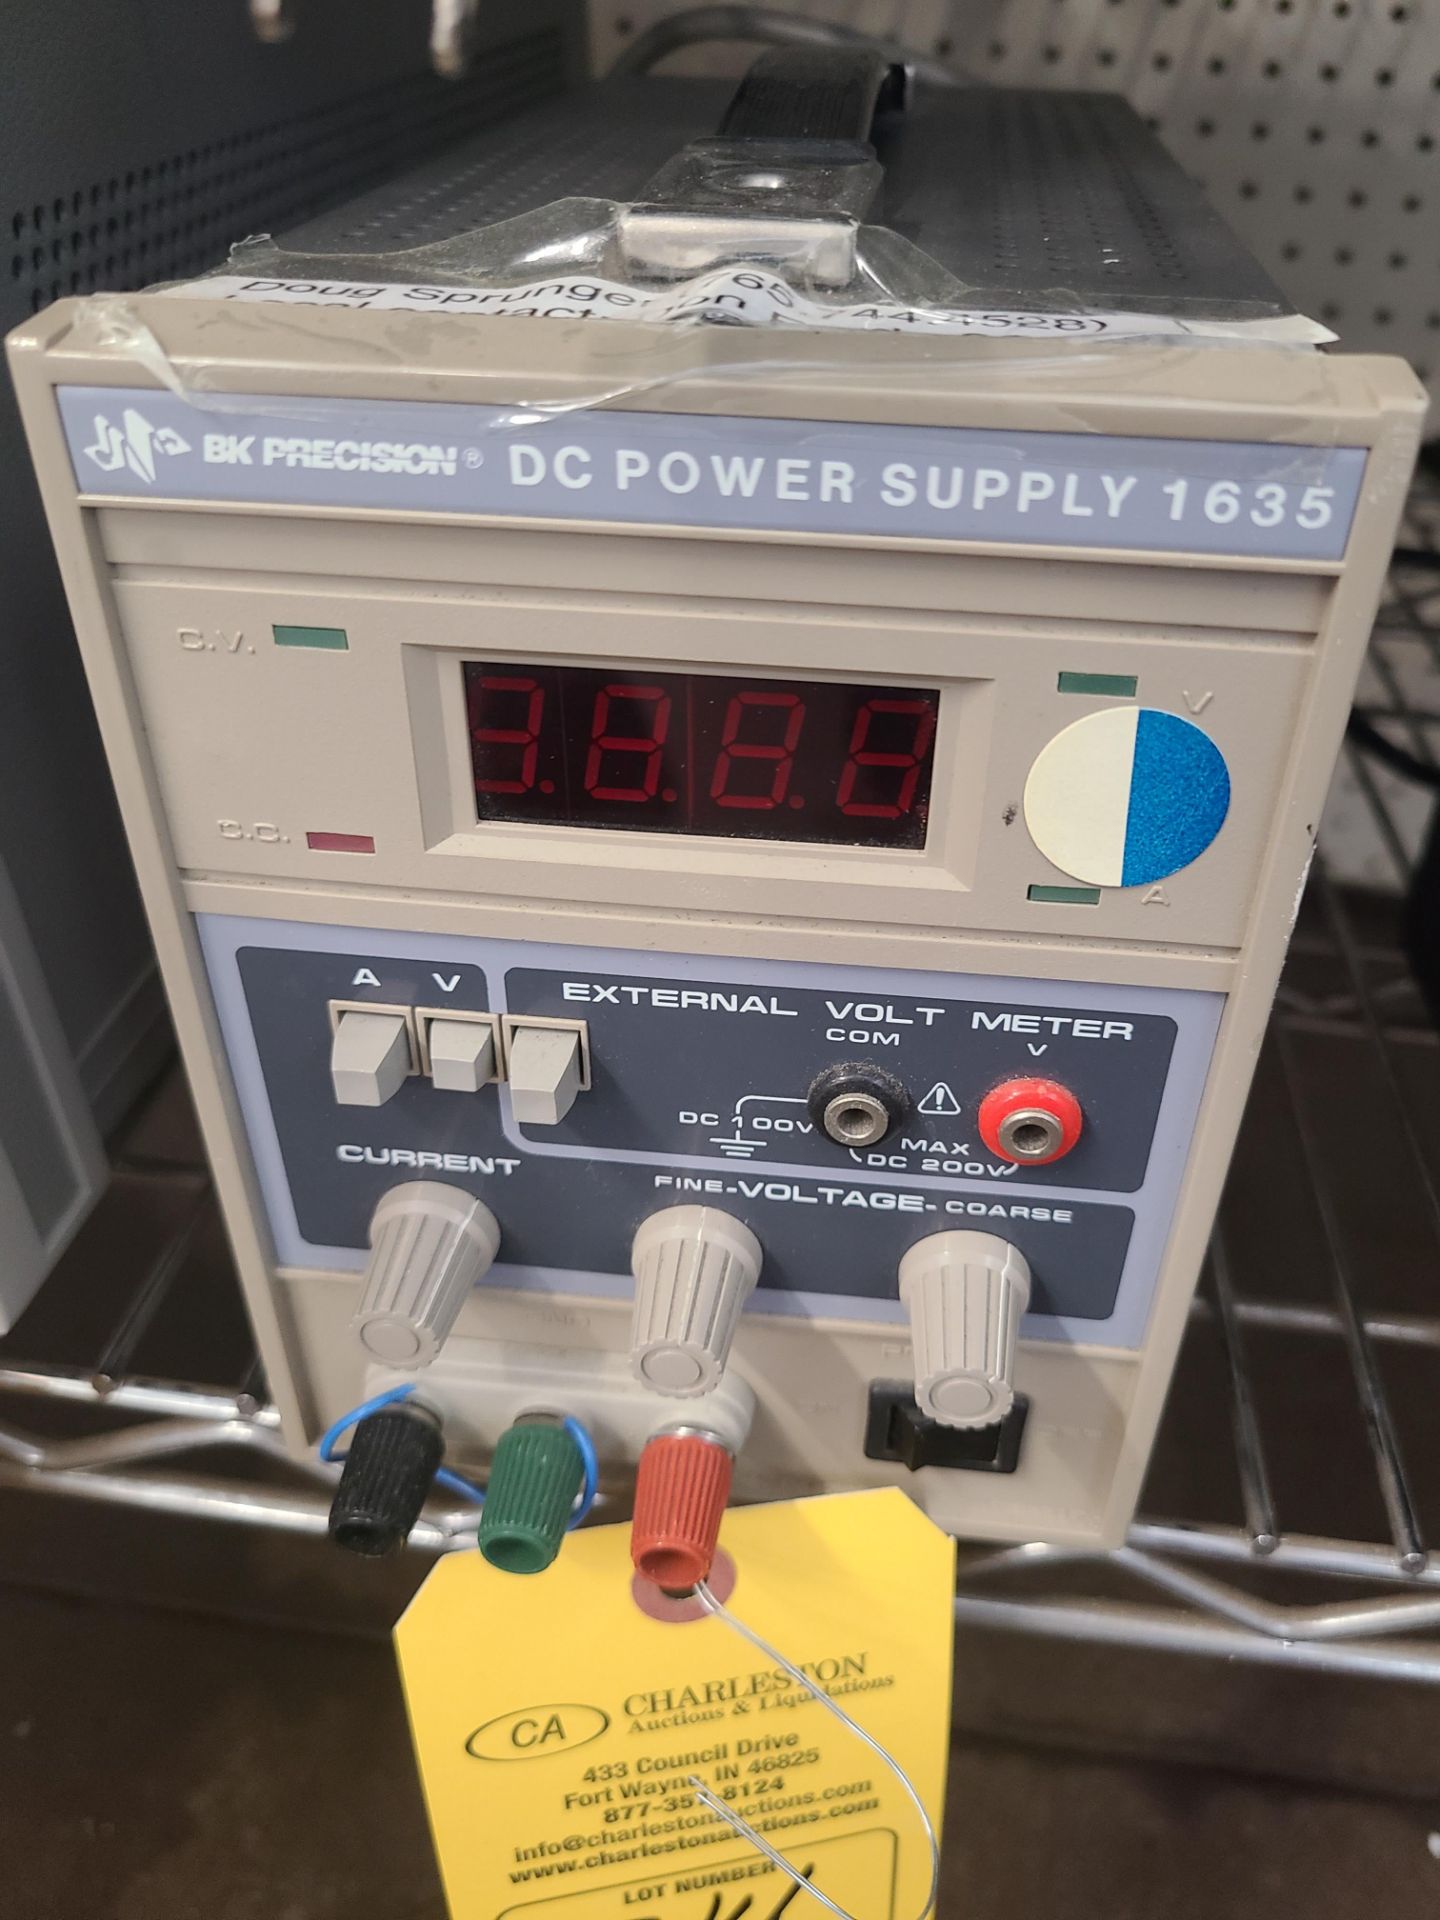 BK PRECISION DC POWER SUPPLY 1635 - Image 2 of 2